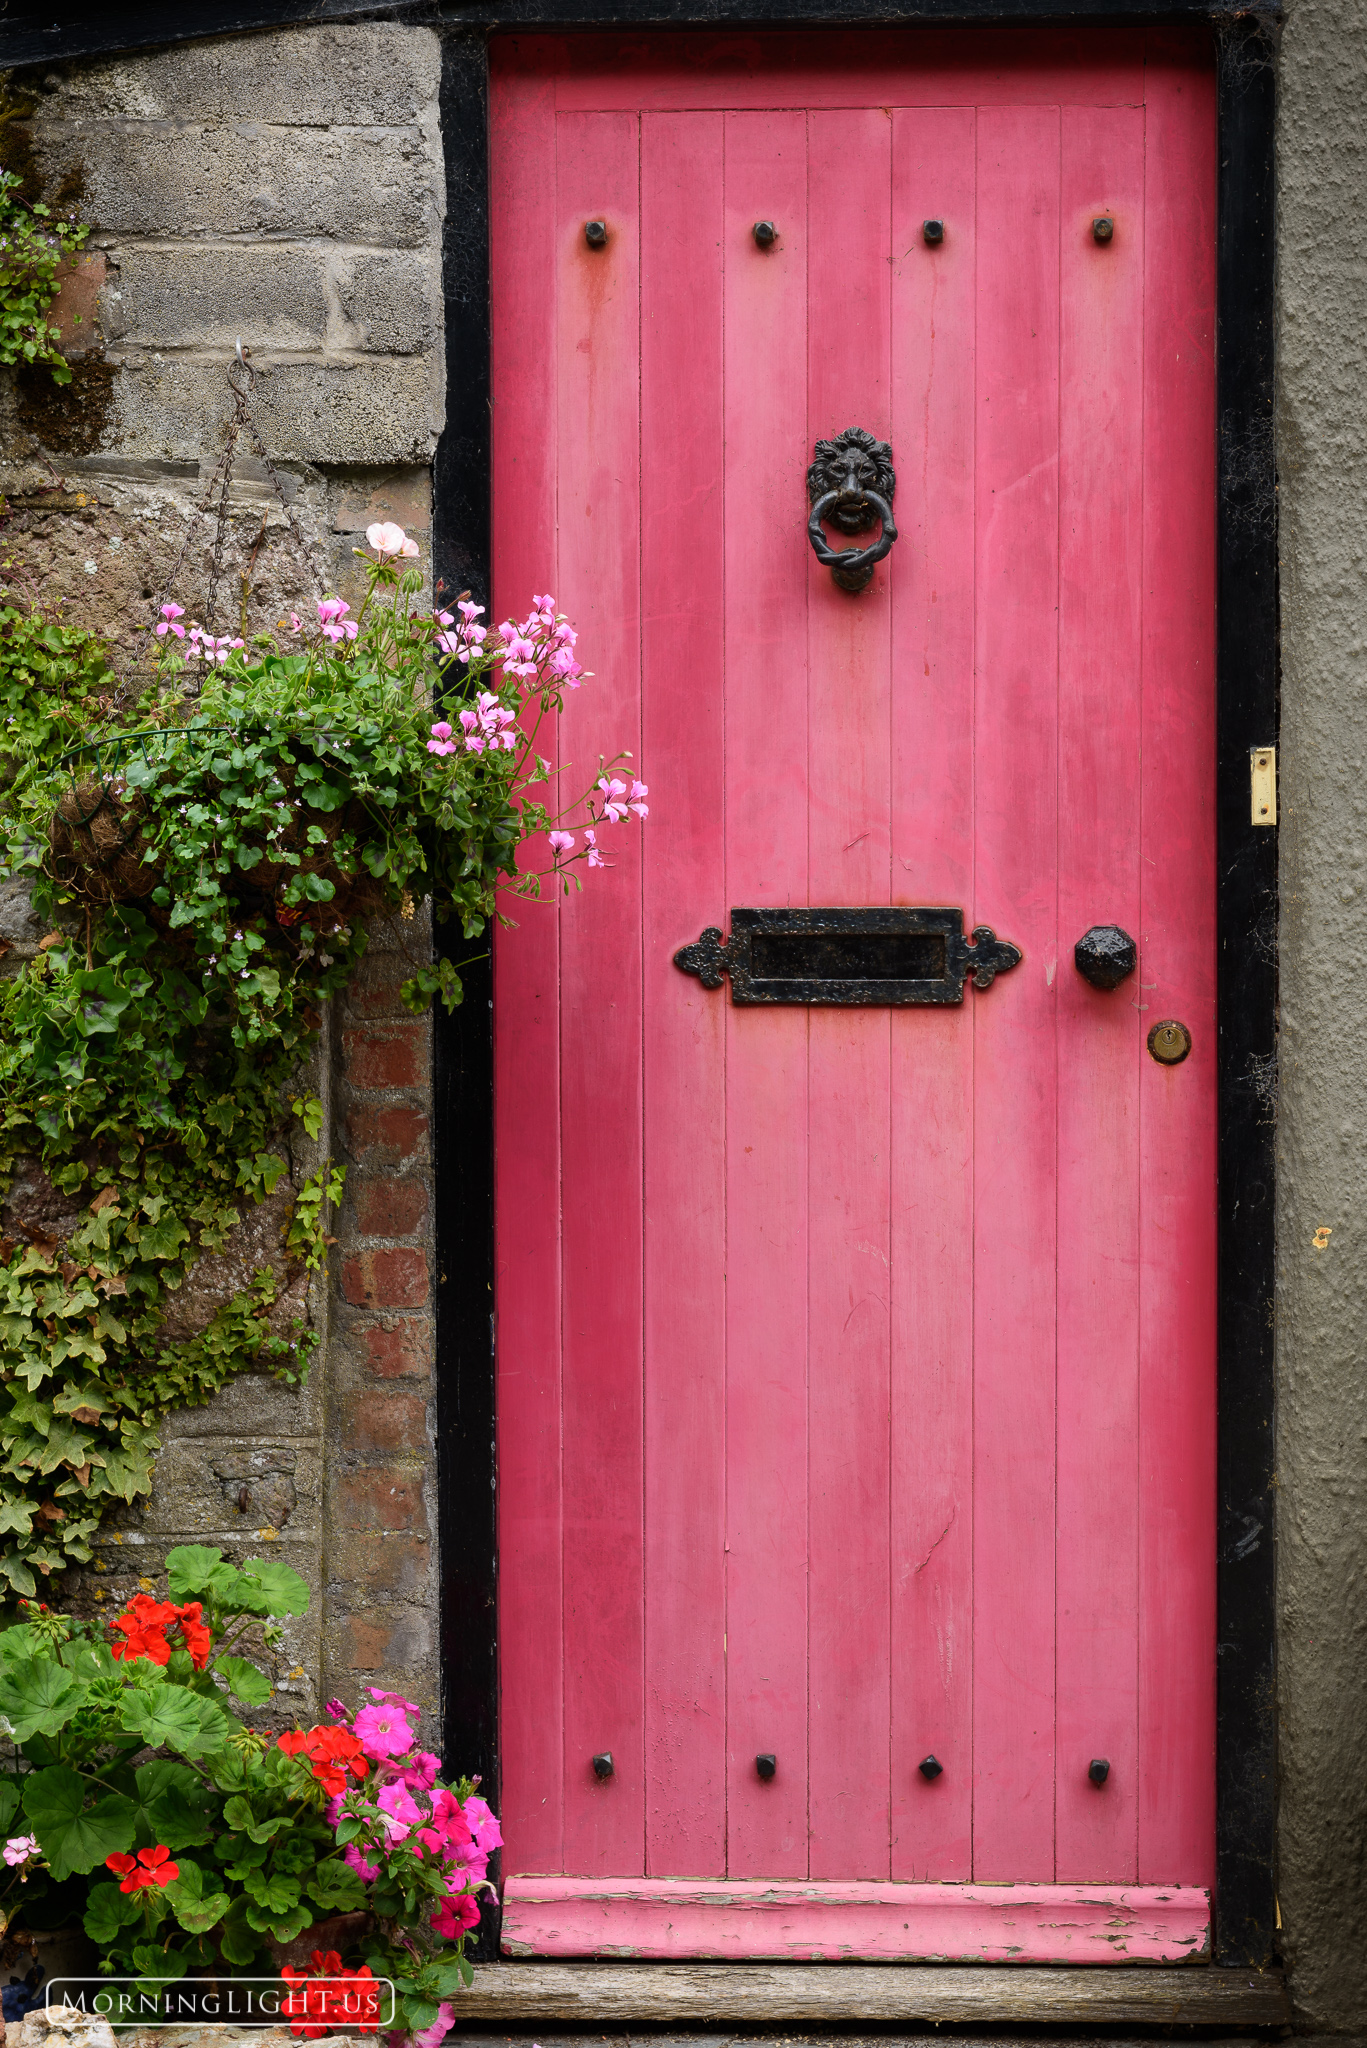 Another coloful door in Kingsand, Cornwall.